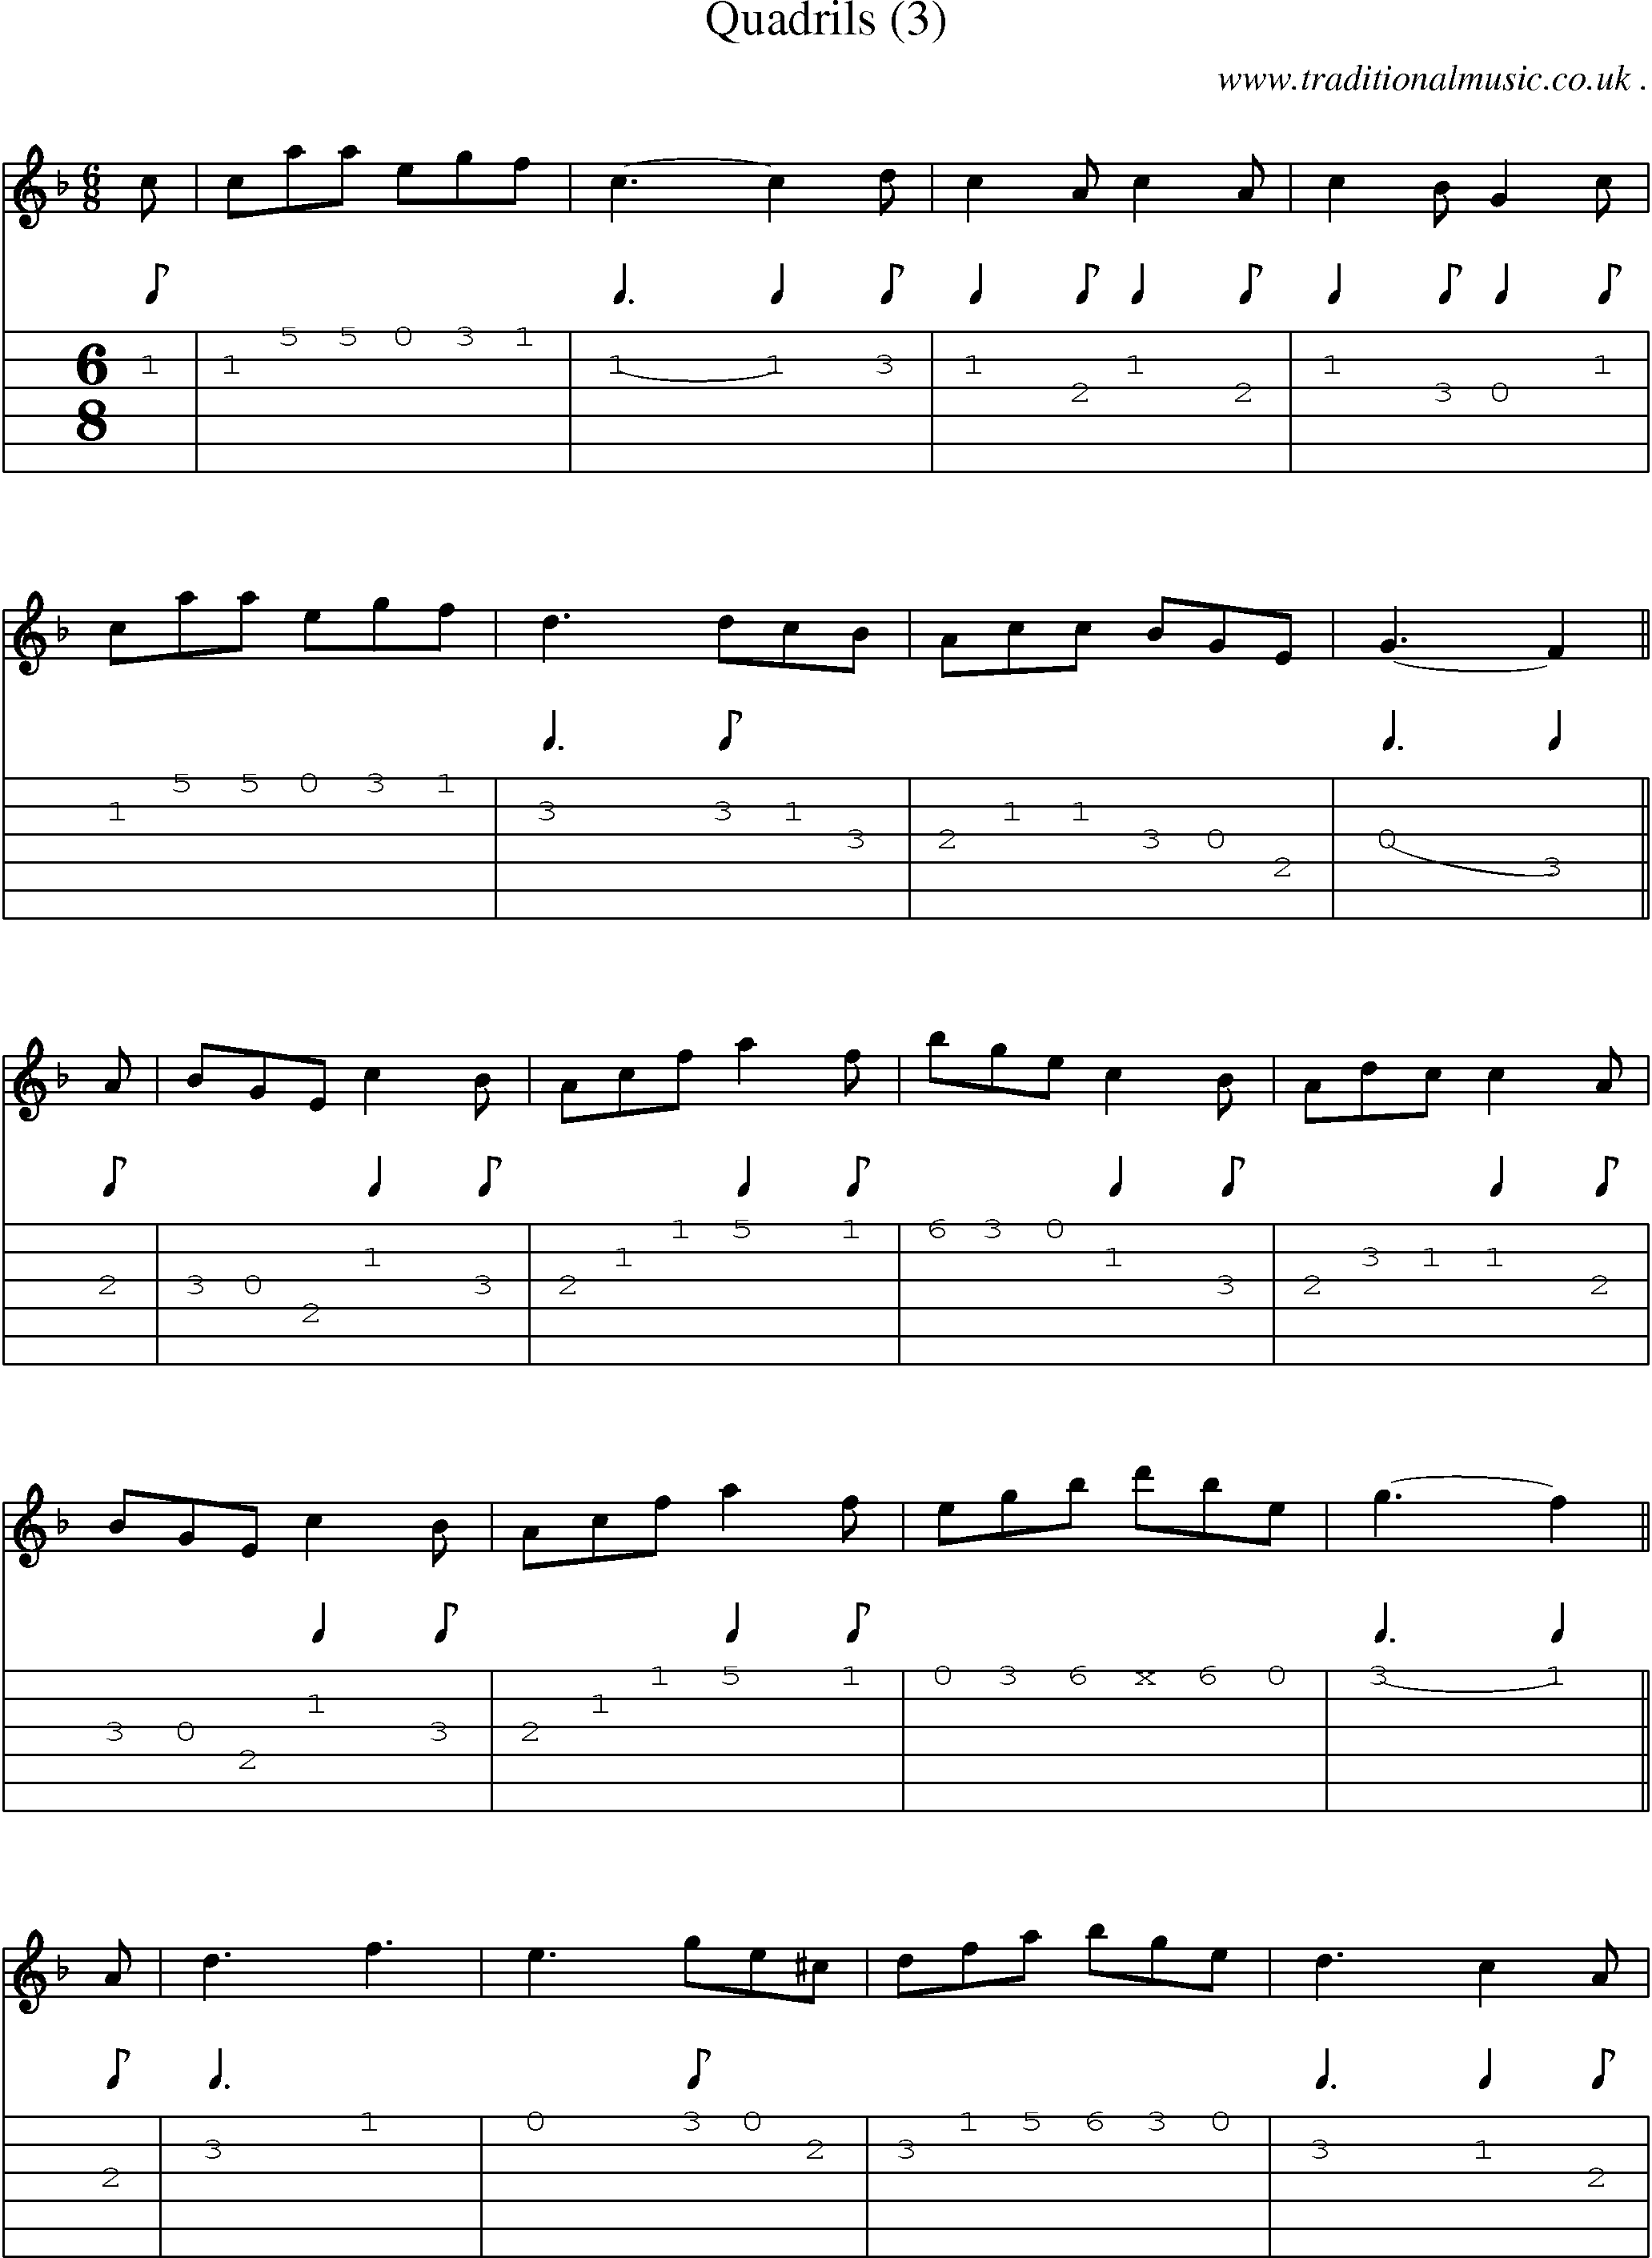 Sheet-Music and Guitar Tabs for Quadrils (3)